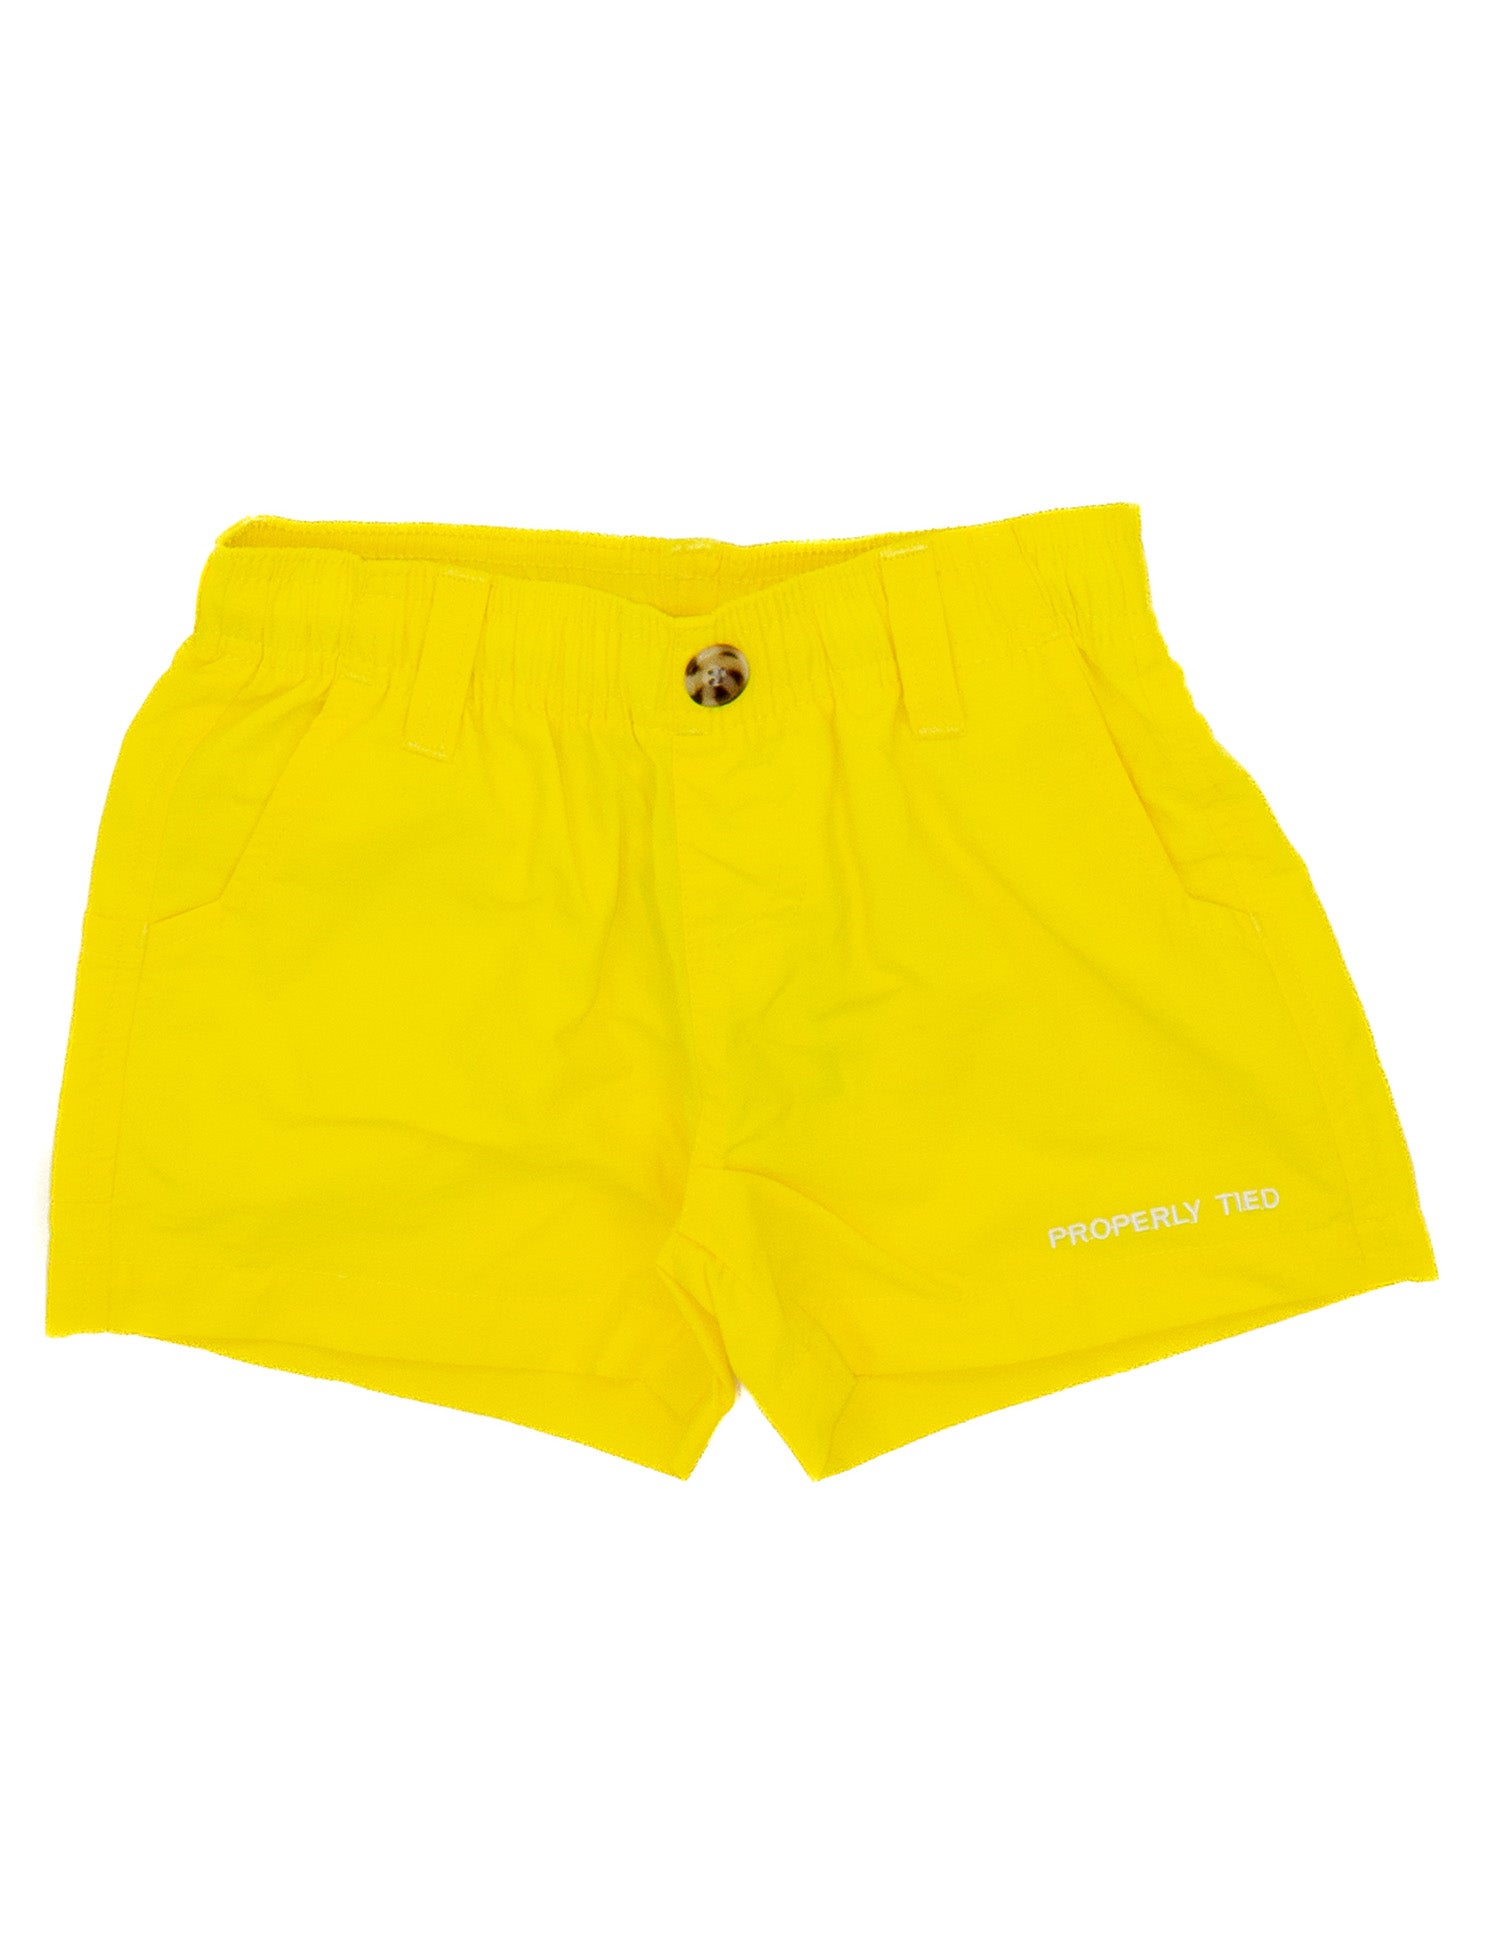 A Stylish Yellow Mallard Boys Shorts with white text and are Properly Tied.